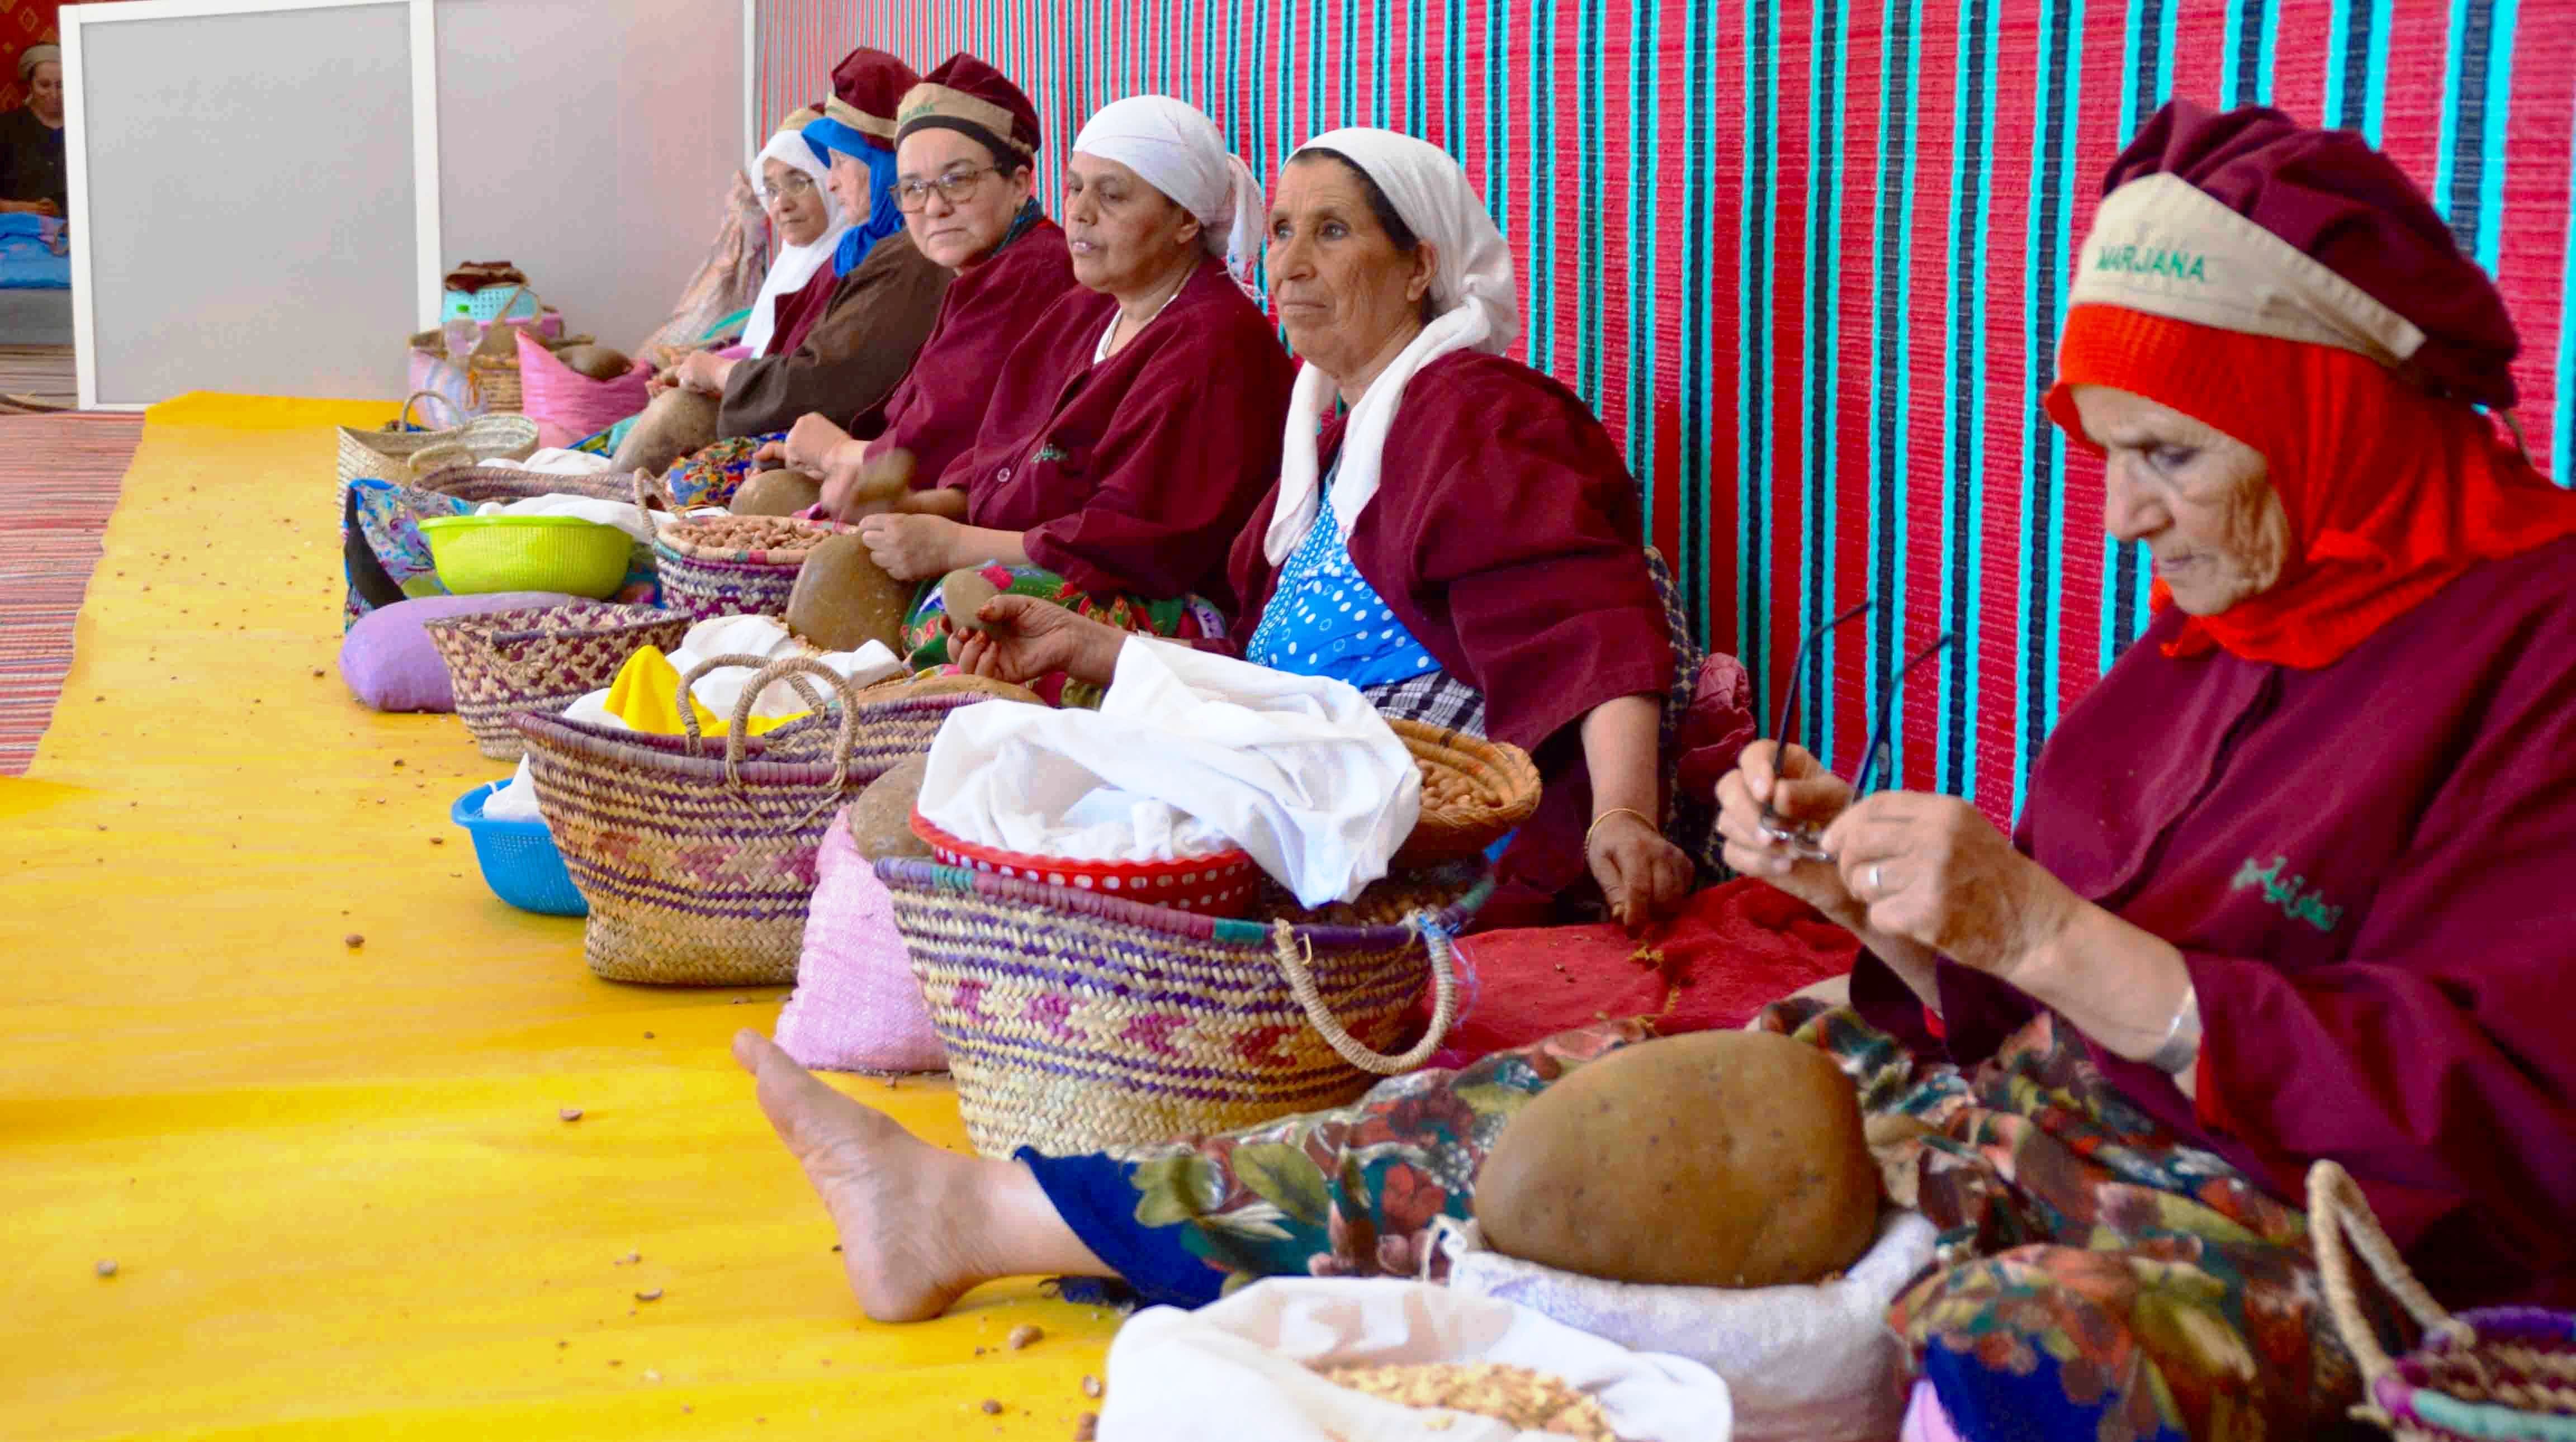 Morocco shopping tour in Essaouira to explore Souks and purchase local handicrafts